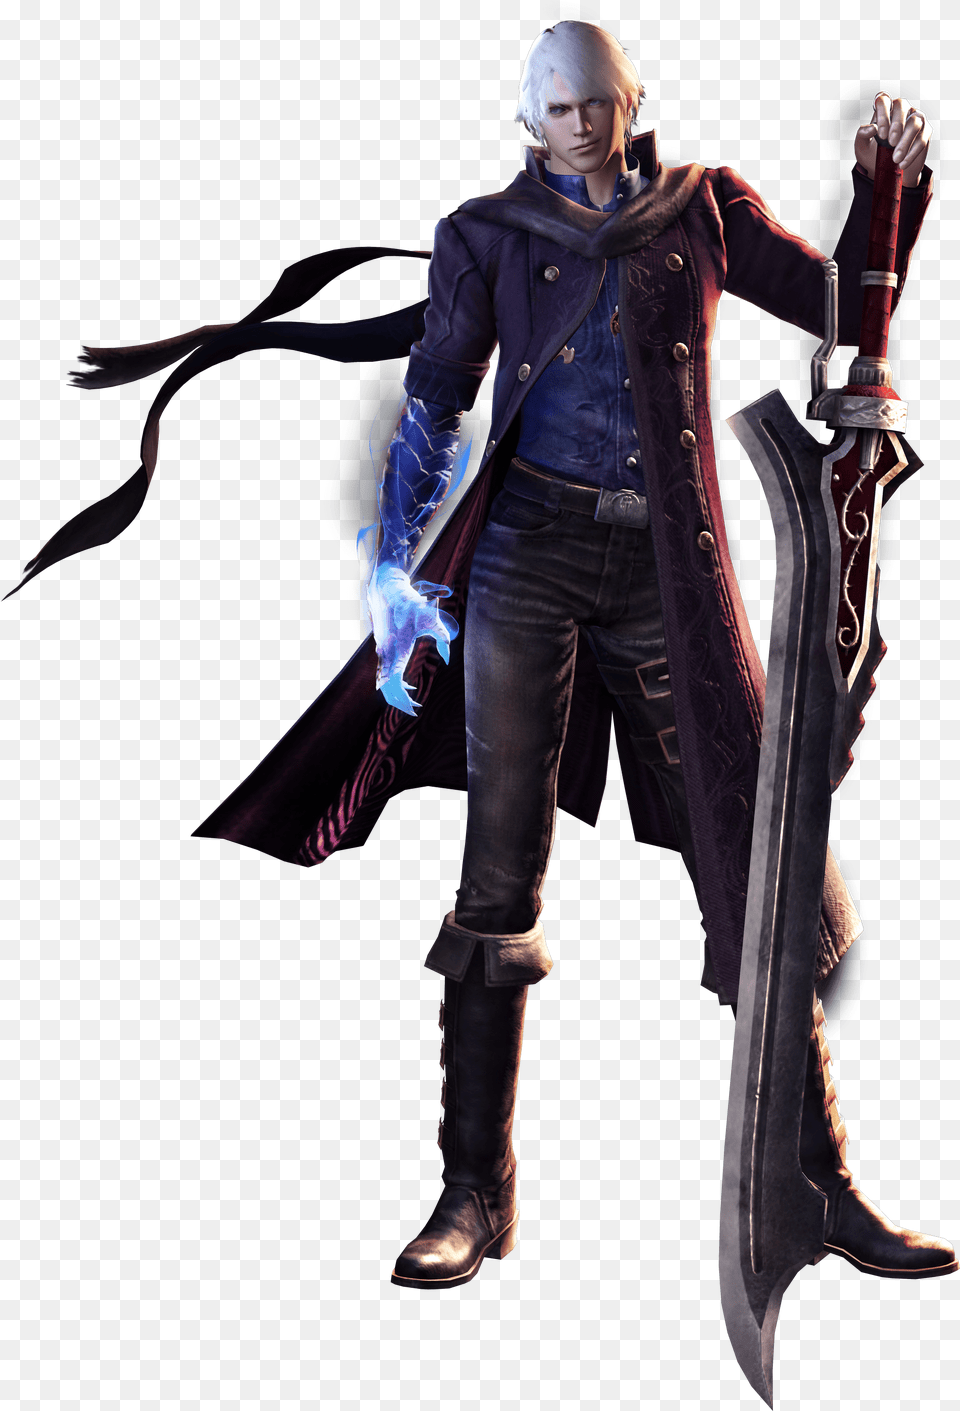 Luxury Devil May Cry Vergil Wallpaper Gregaman Manage Devil May Cry Personajes, Weapon, Sword, Person, Man Free Transparent Png